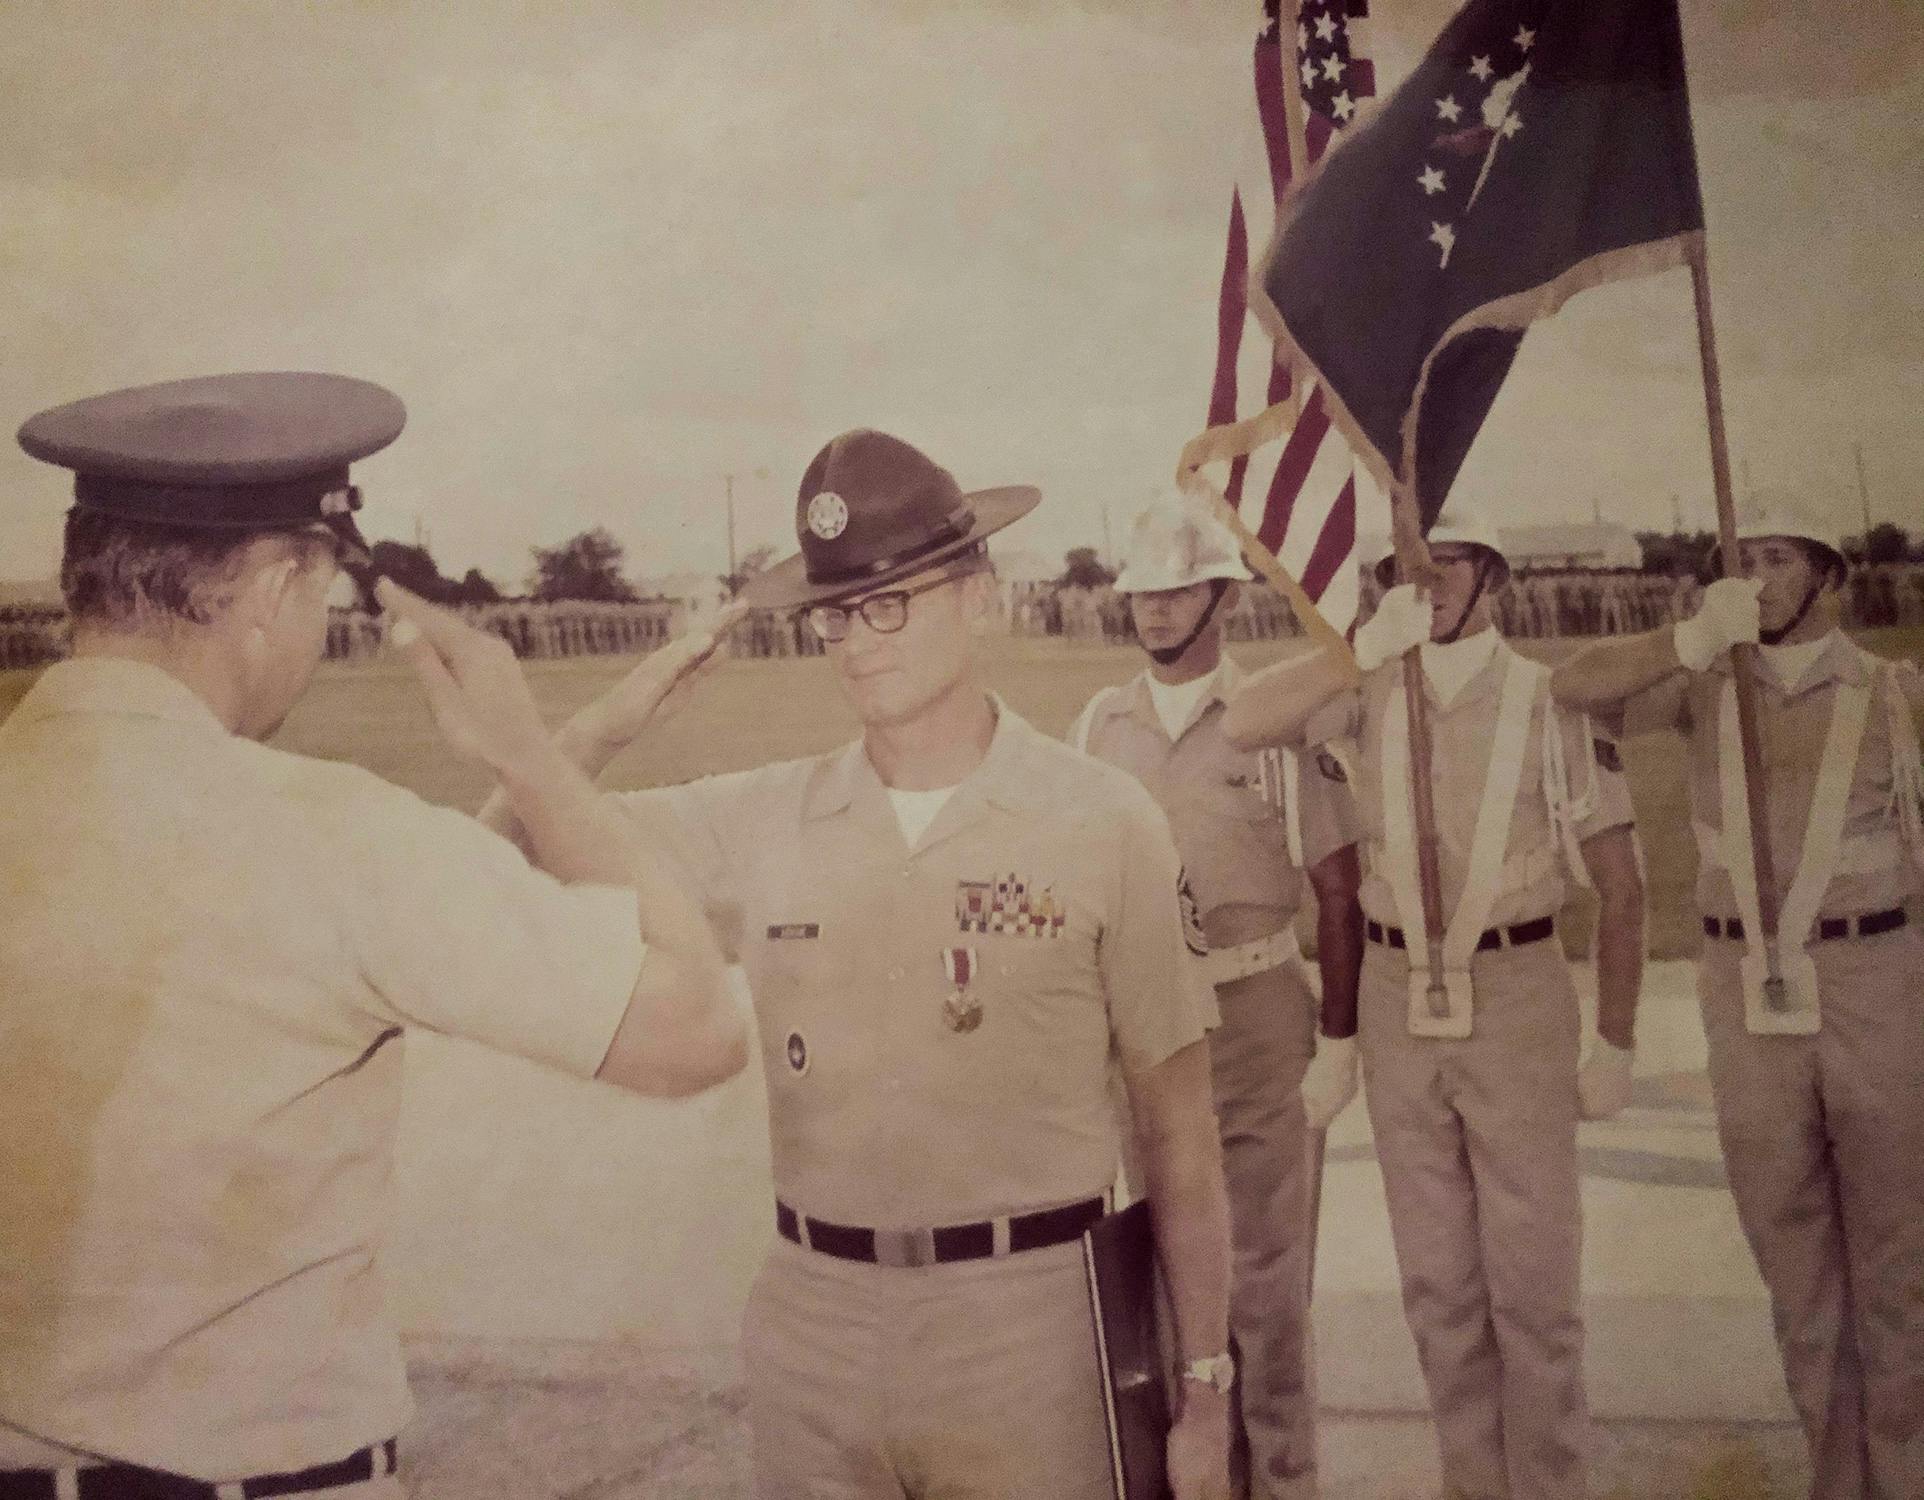 A soldier, Sergeant Edward Joseph League, at a promotion ceremony at Lackland in the sixties.